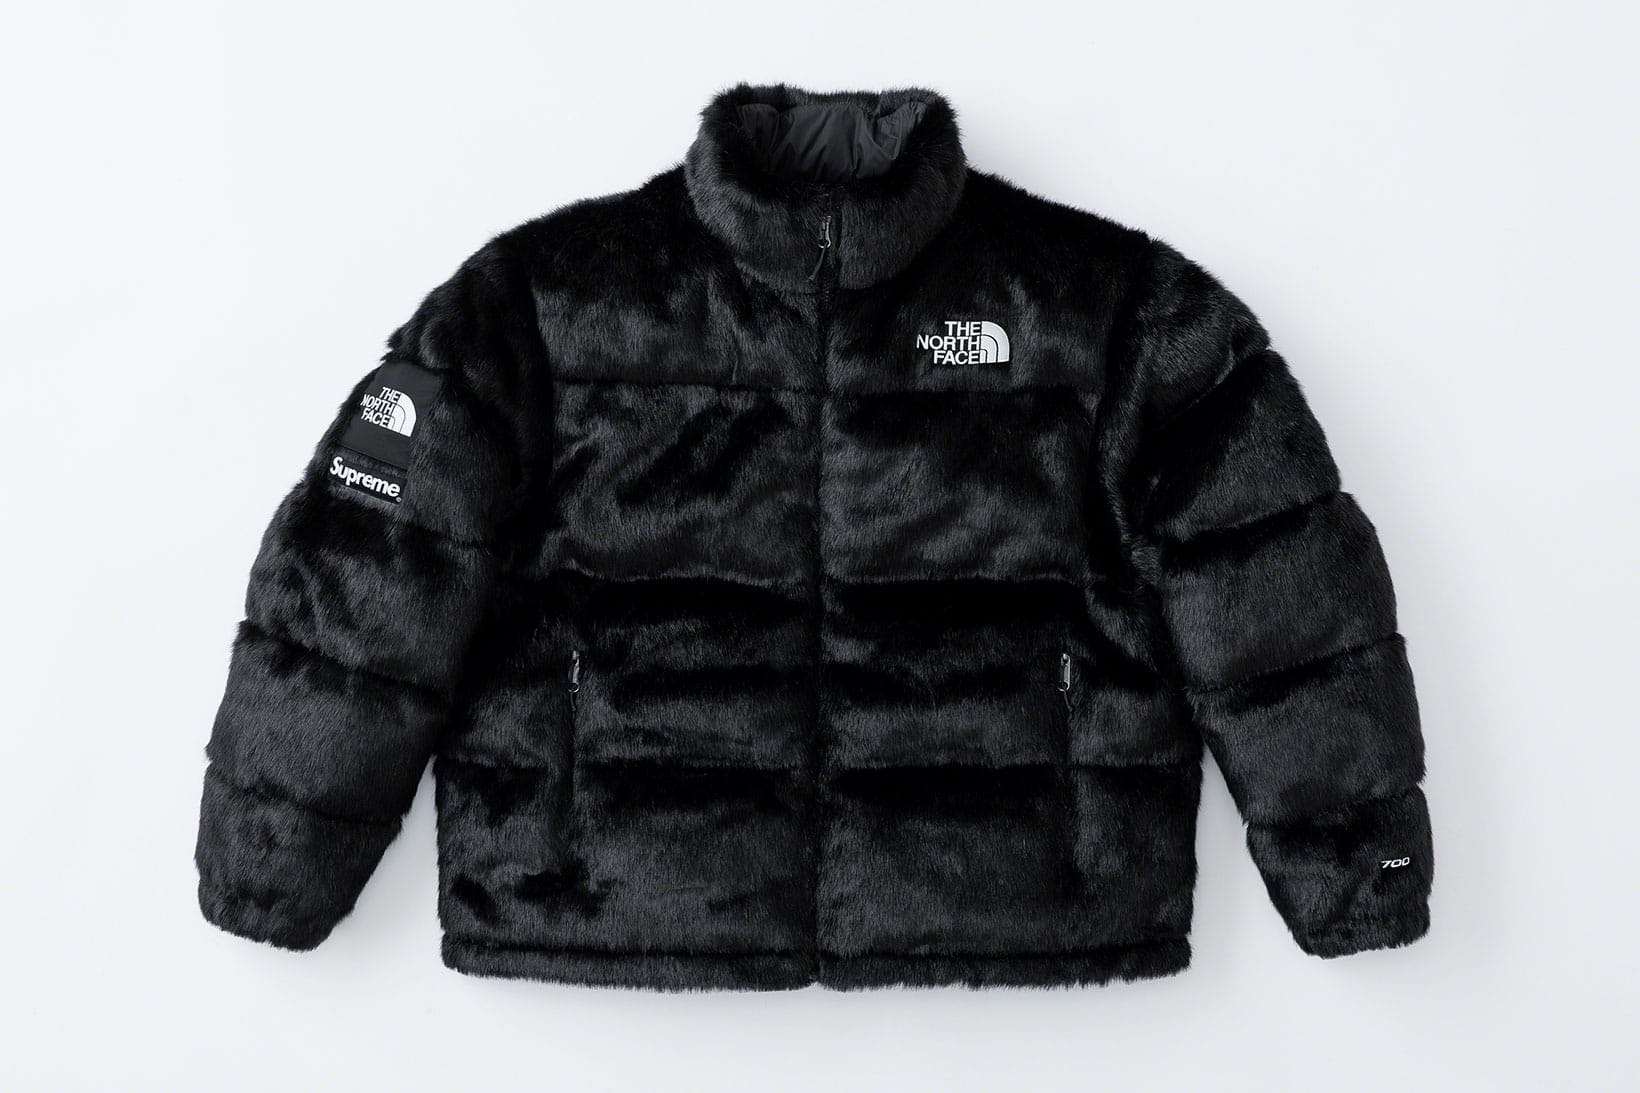 north face backpack coat